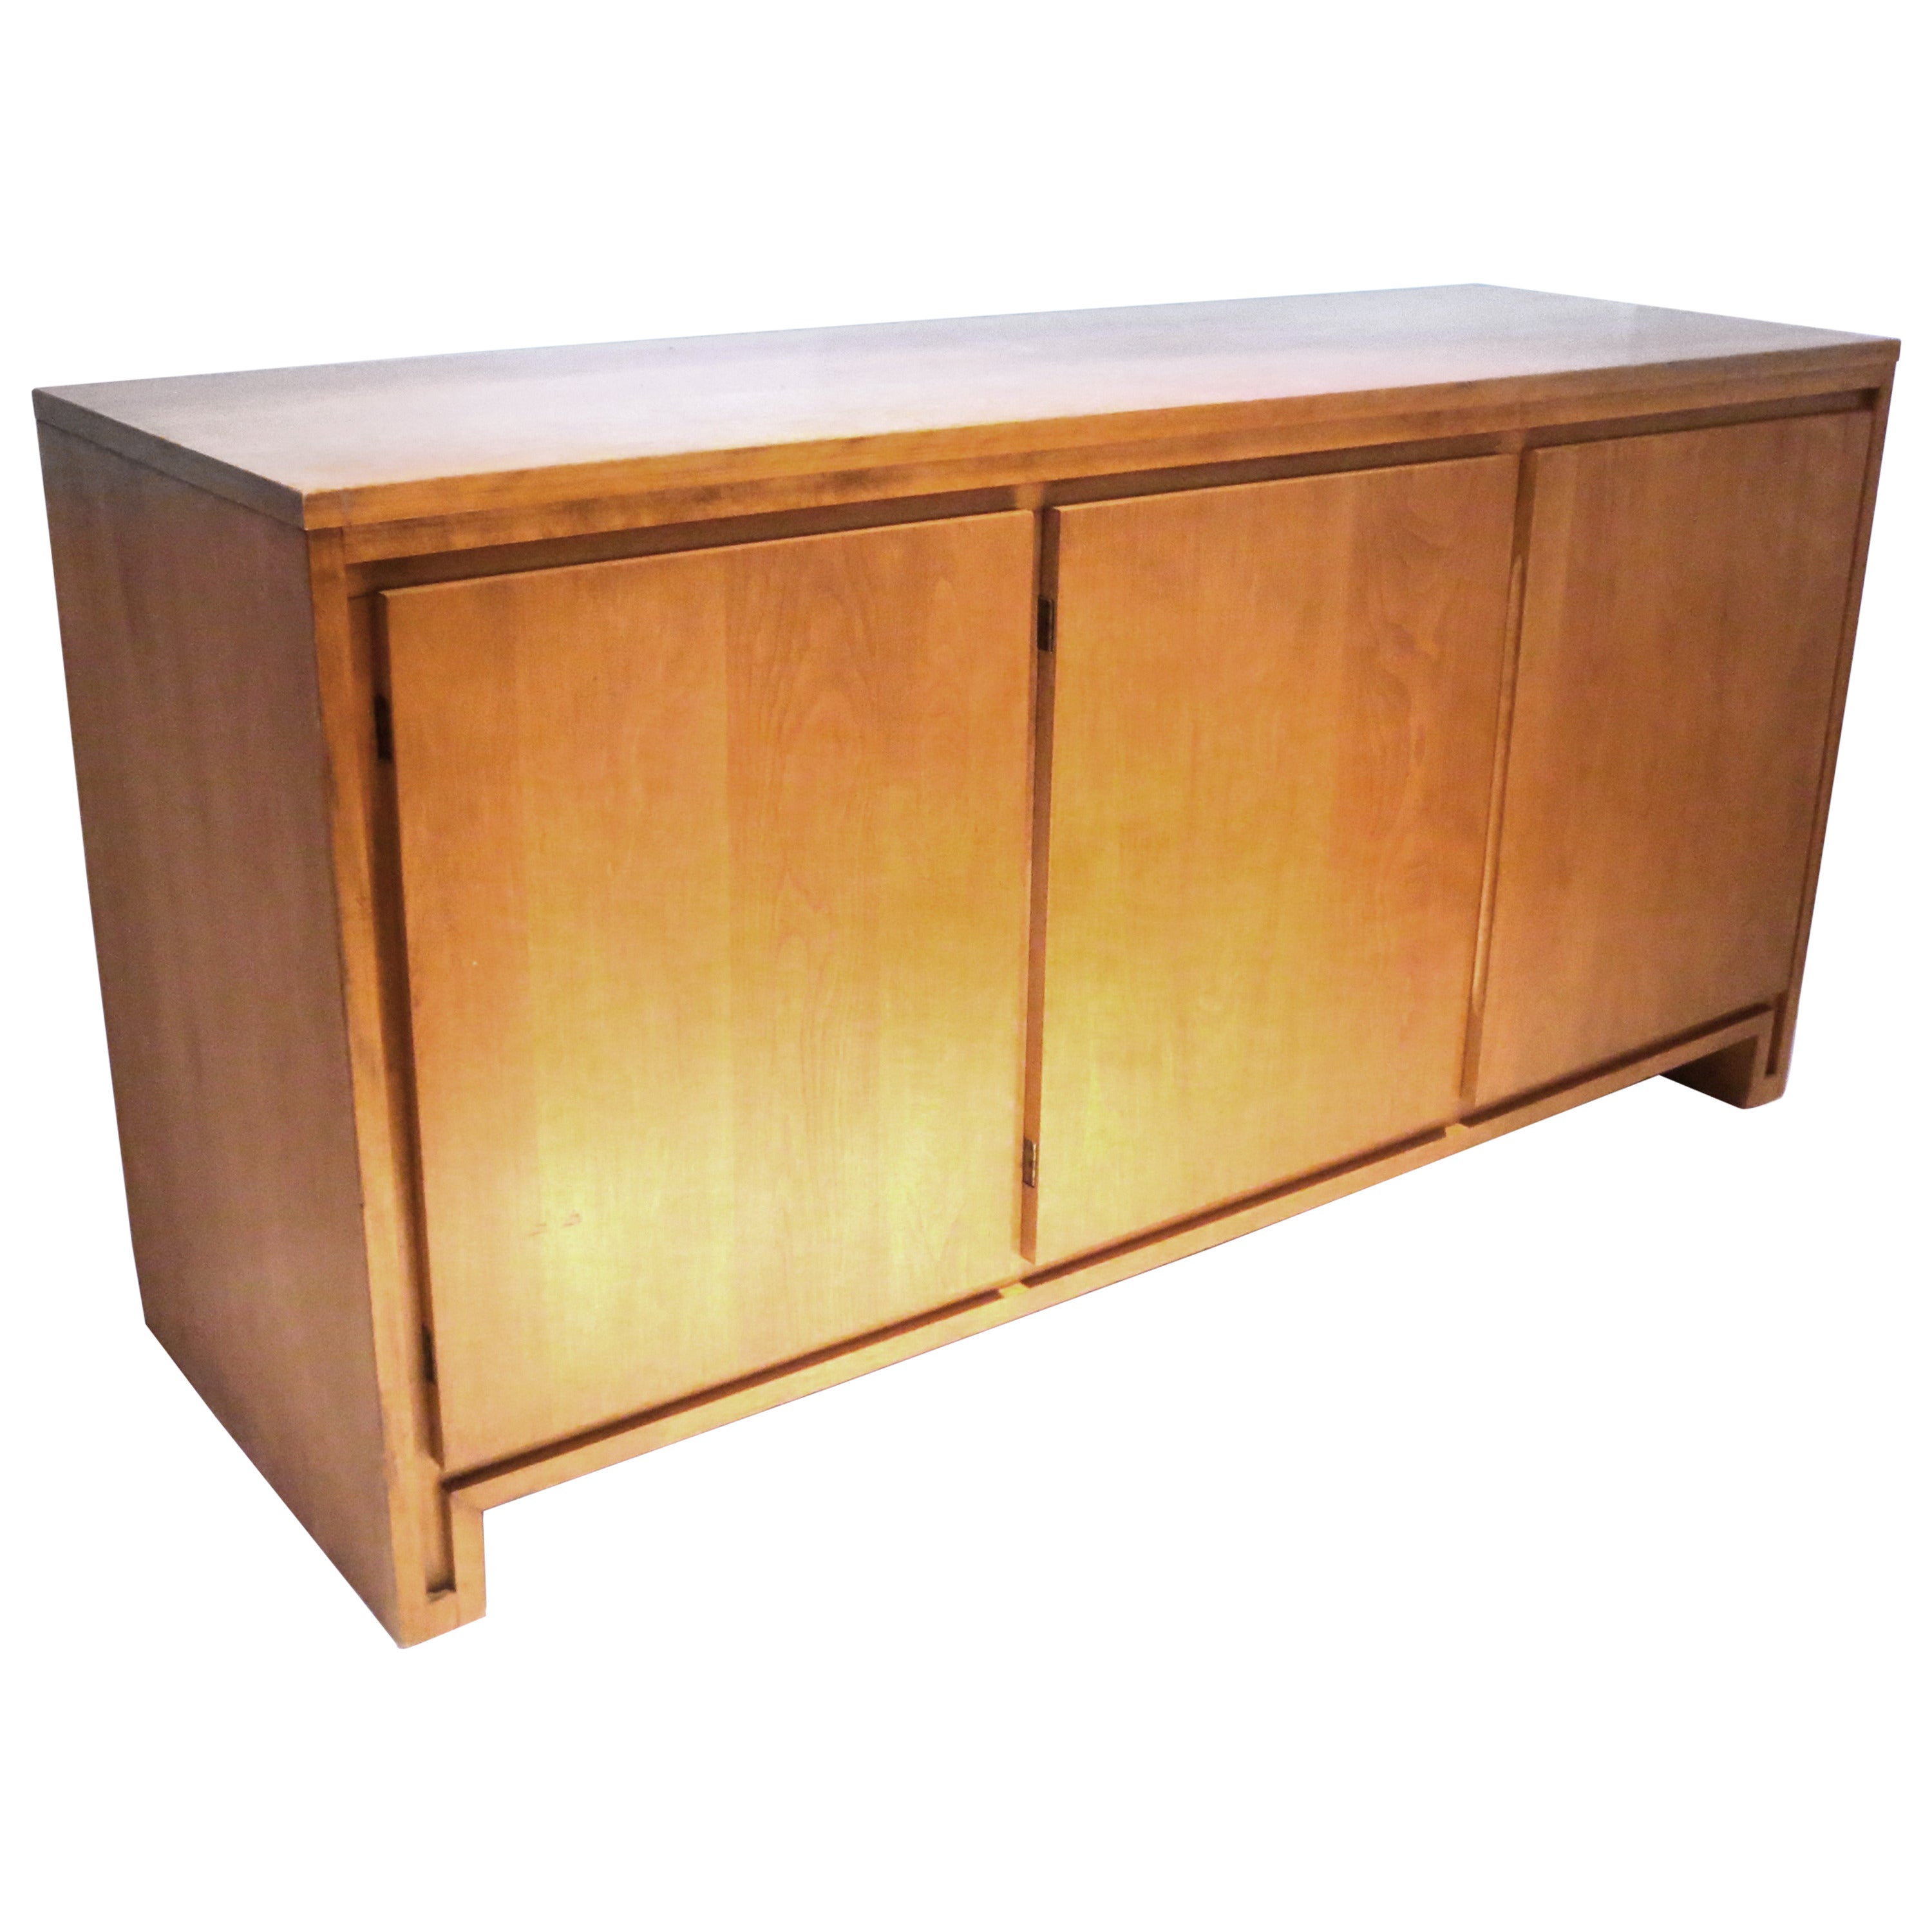 1950s Solid Maple Sideboard or Credenza Design by Russel Wright for Conant Ball